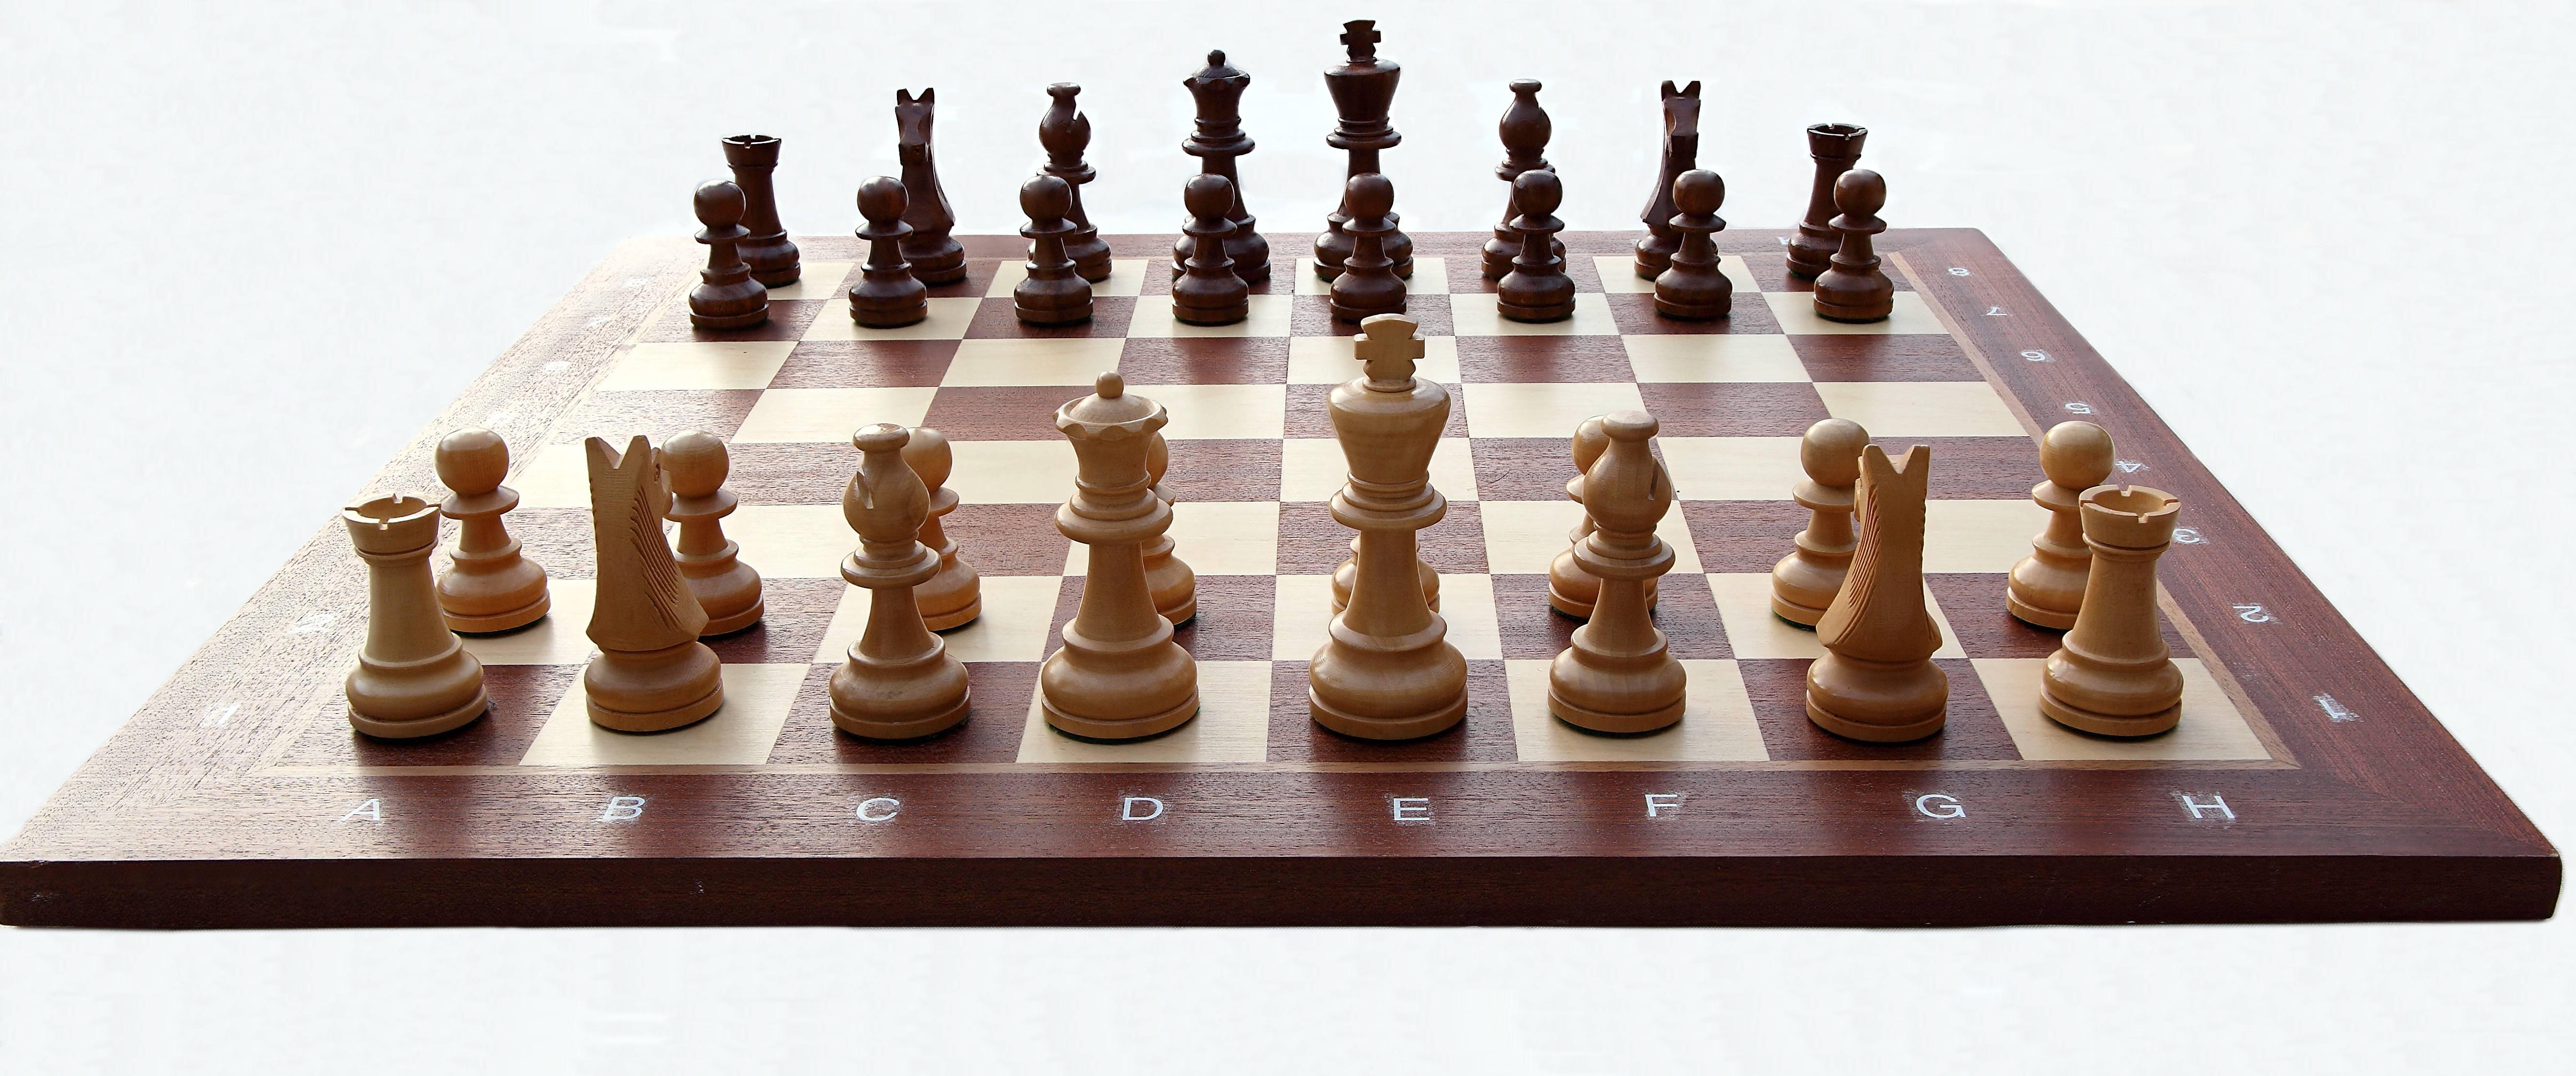 Chess_board_with_chess_set_in_opening_position_2012_PD_05.jpg